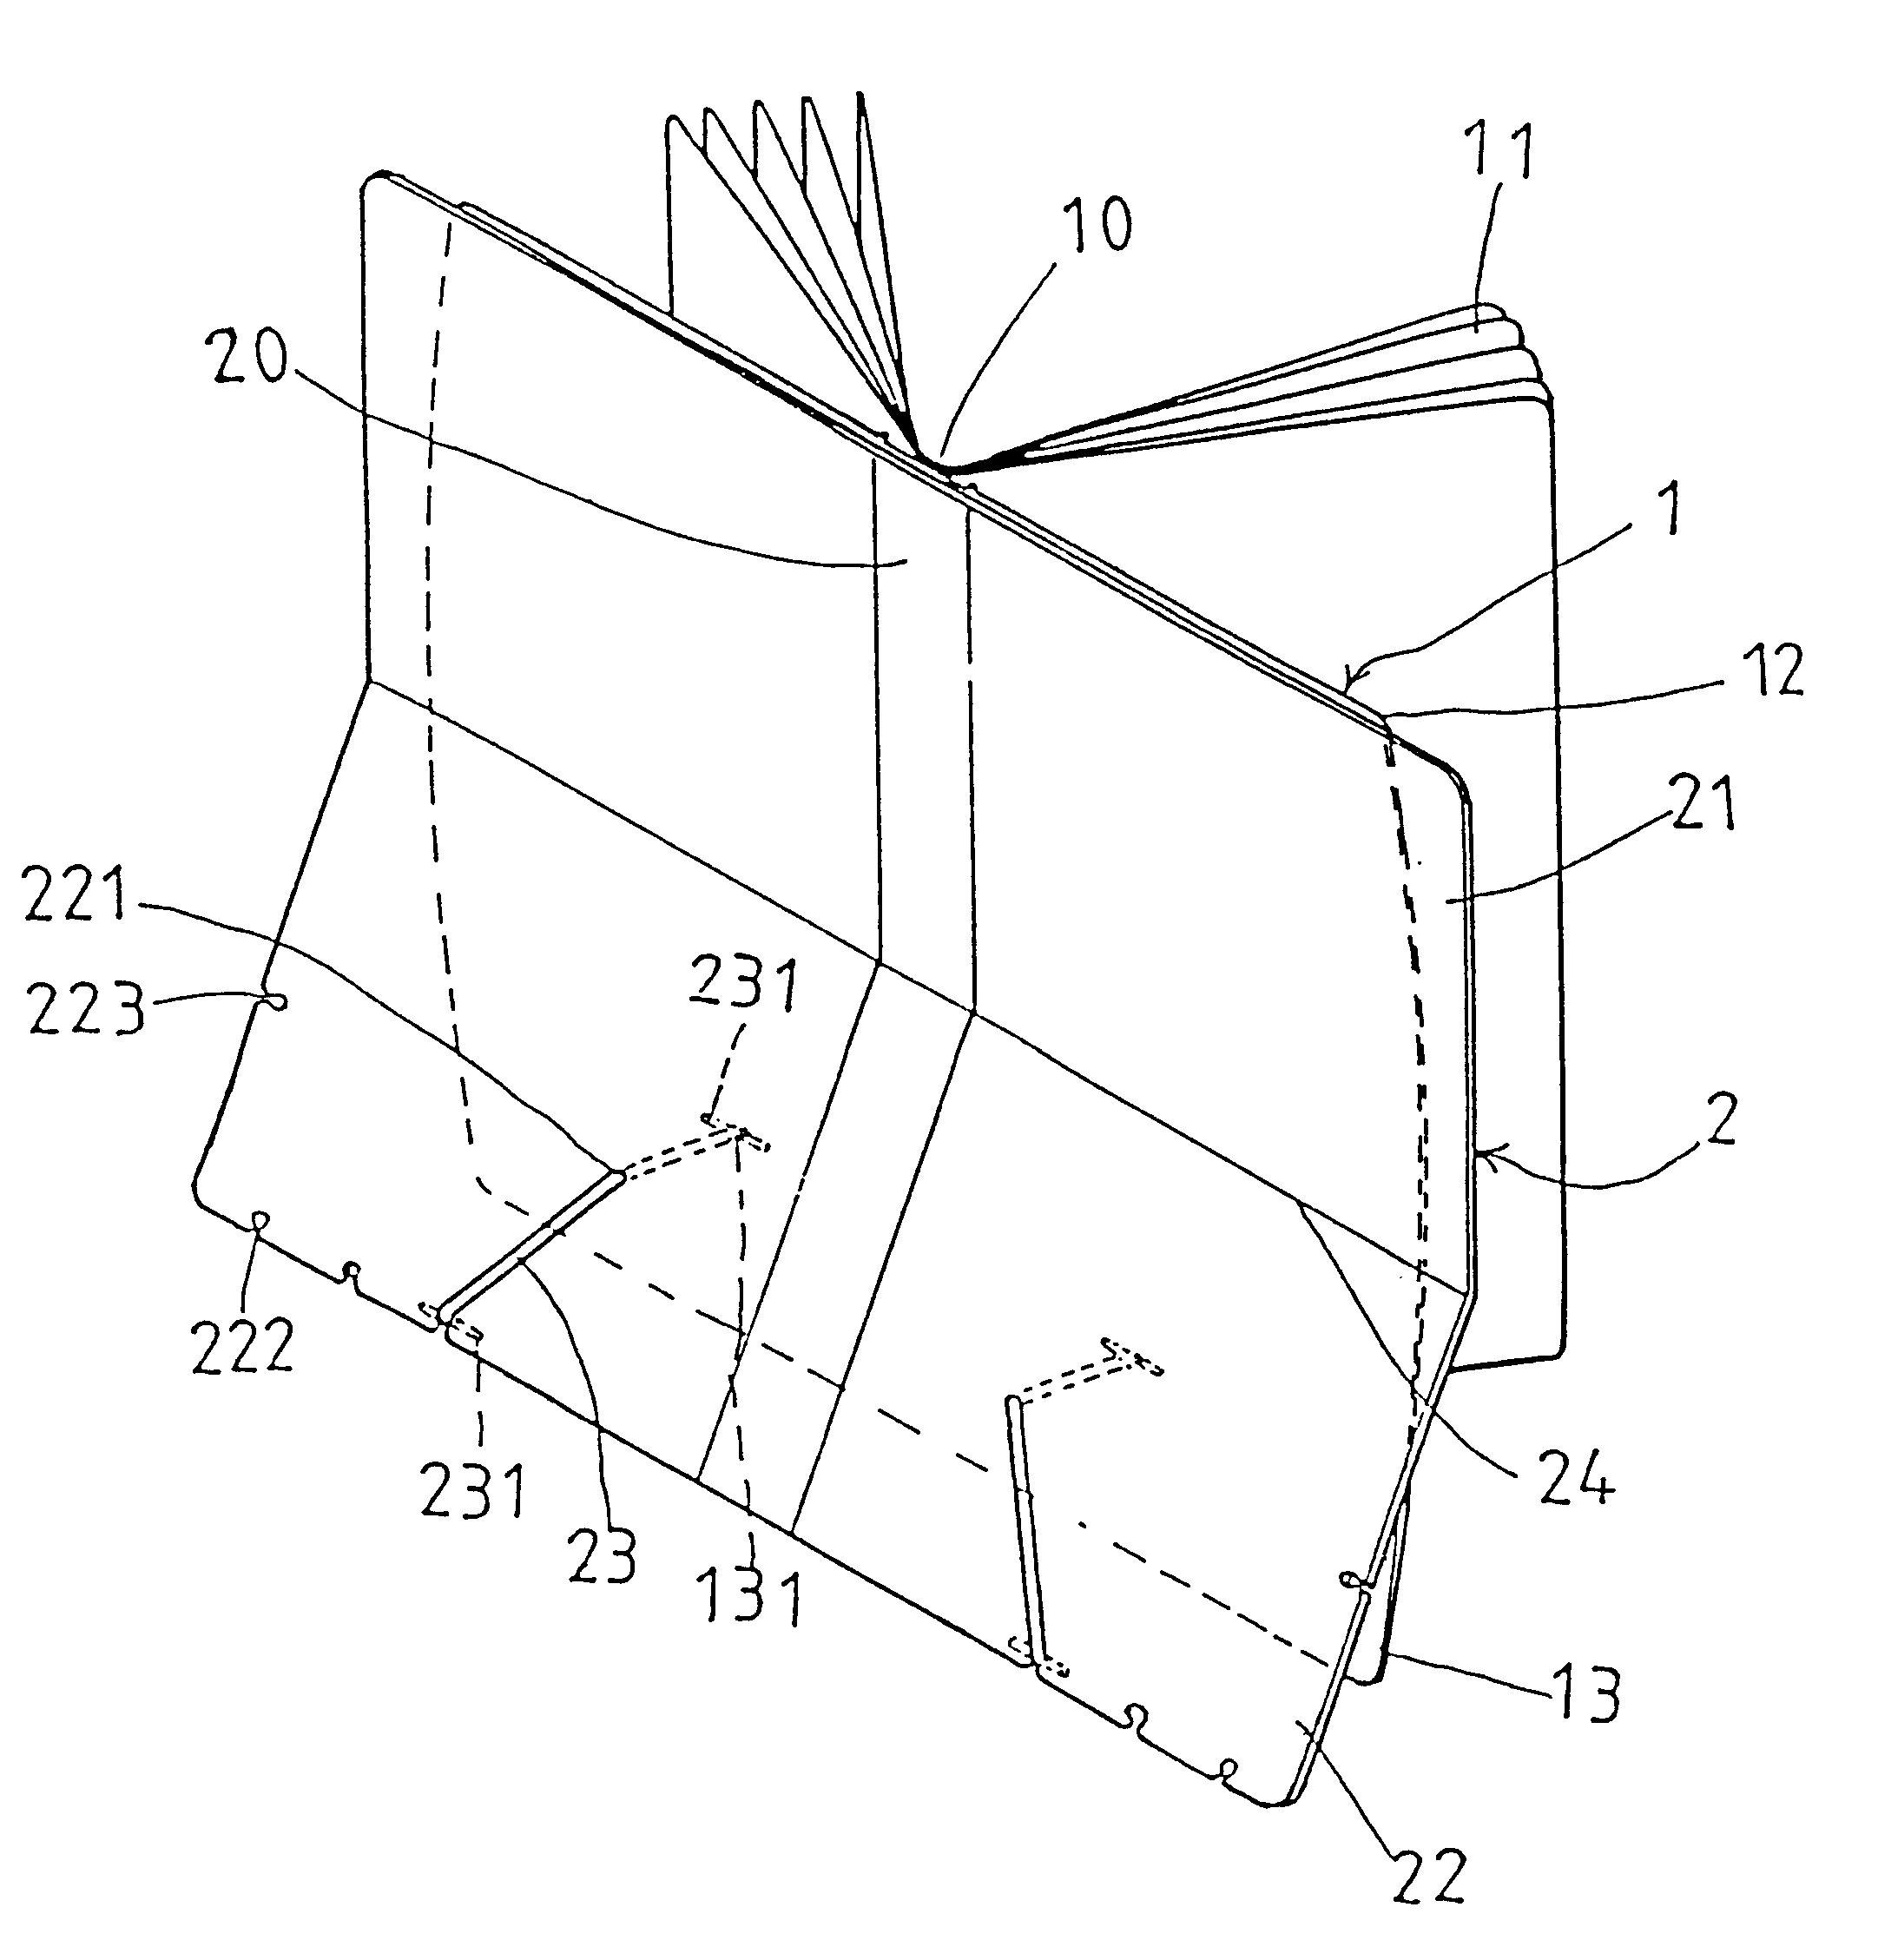 Structure of a file with adjustable inclination angle